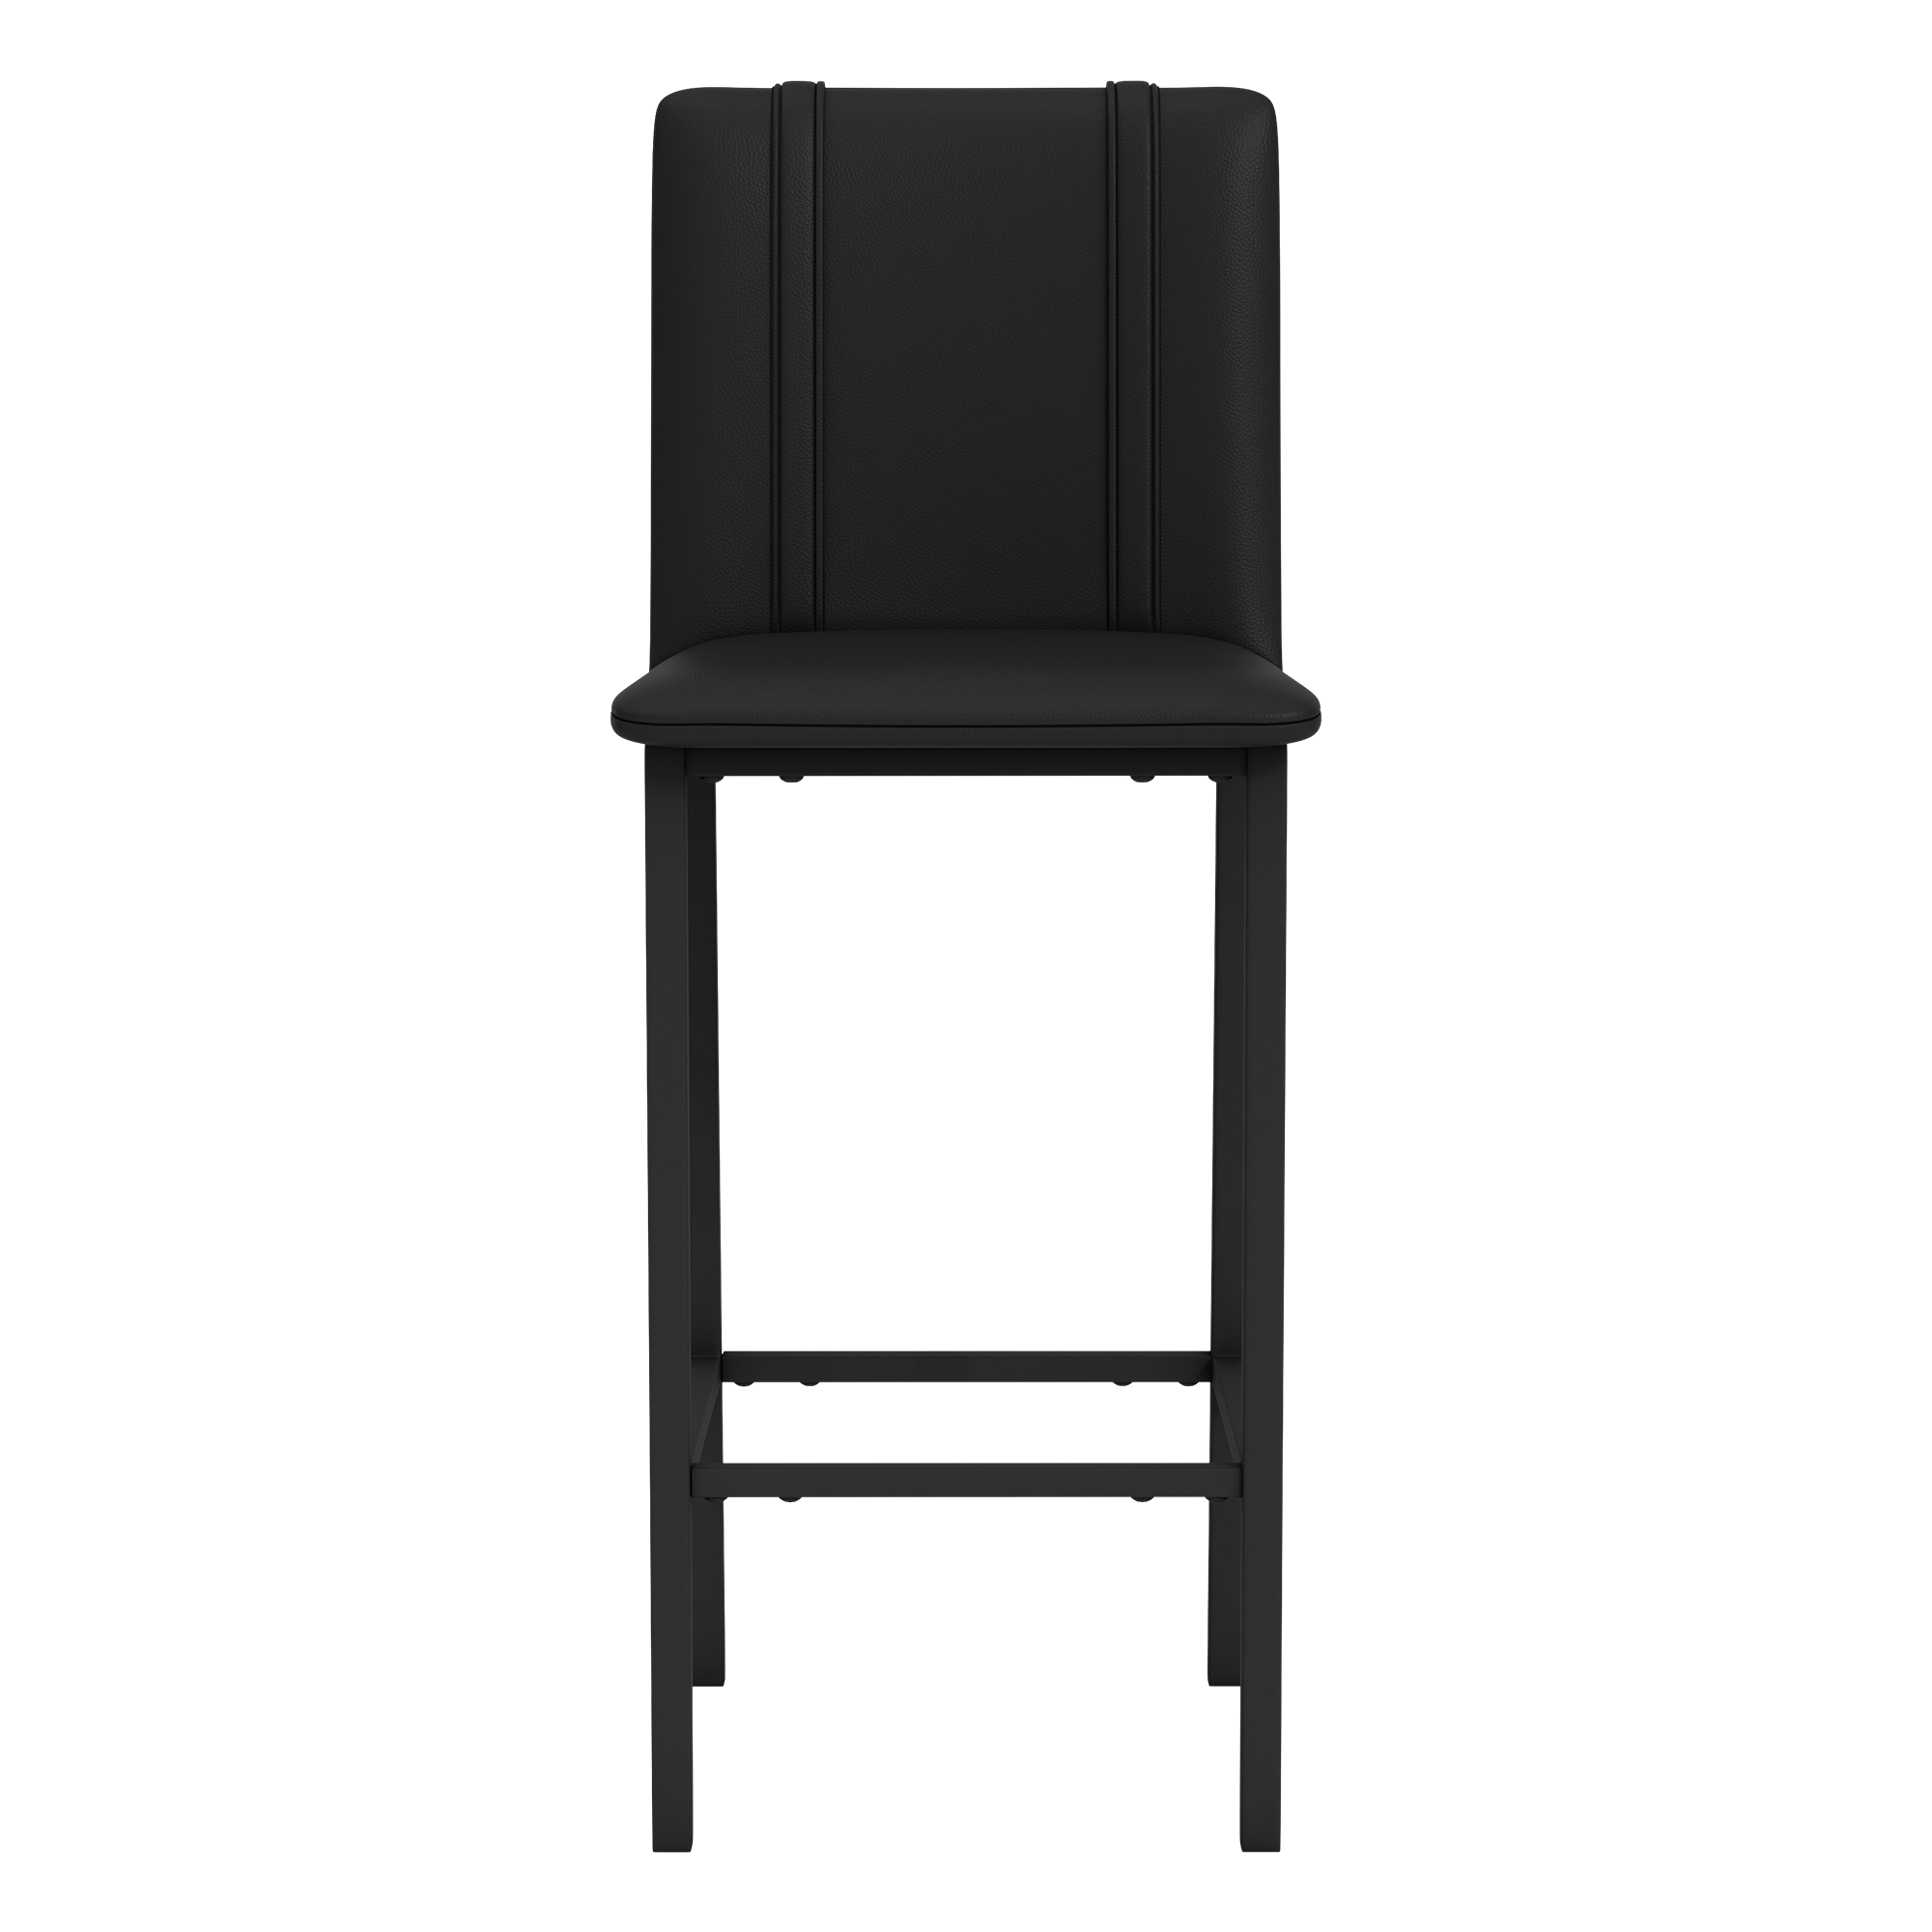 Bar Stool 500 with Chicago White Sox Cooperstown Secondary Set of 2